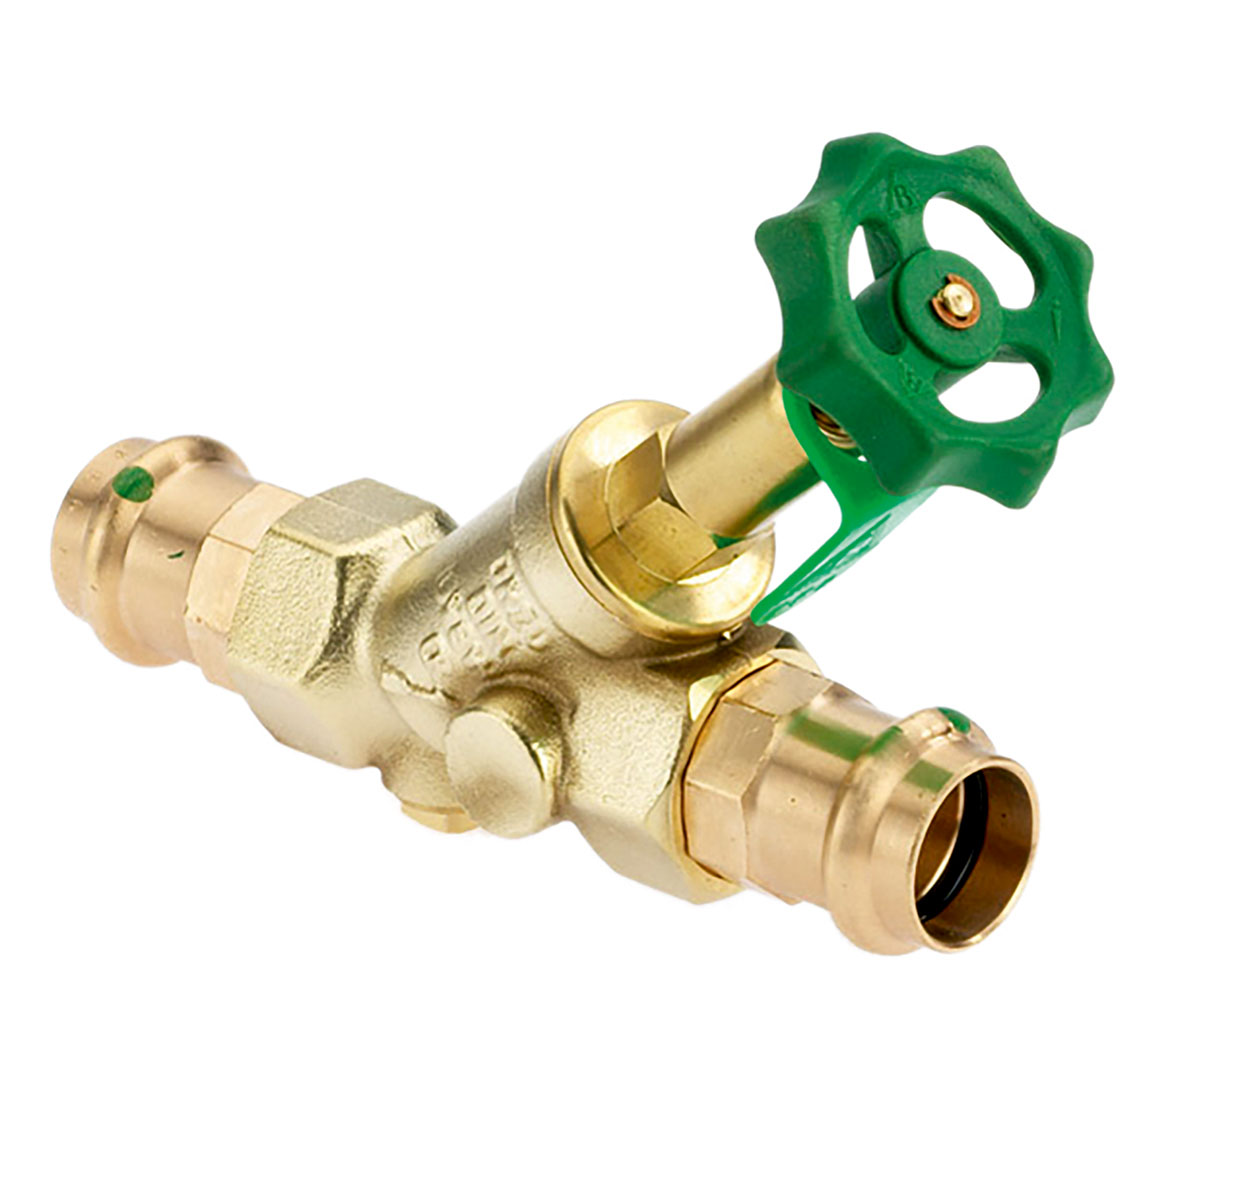 1680420 - CR-Brass Combined Free-flow and Backflow-preventer Valve Viega Profipress, rising, without drain valve